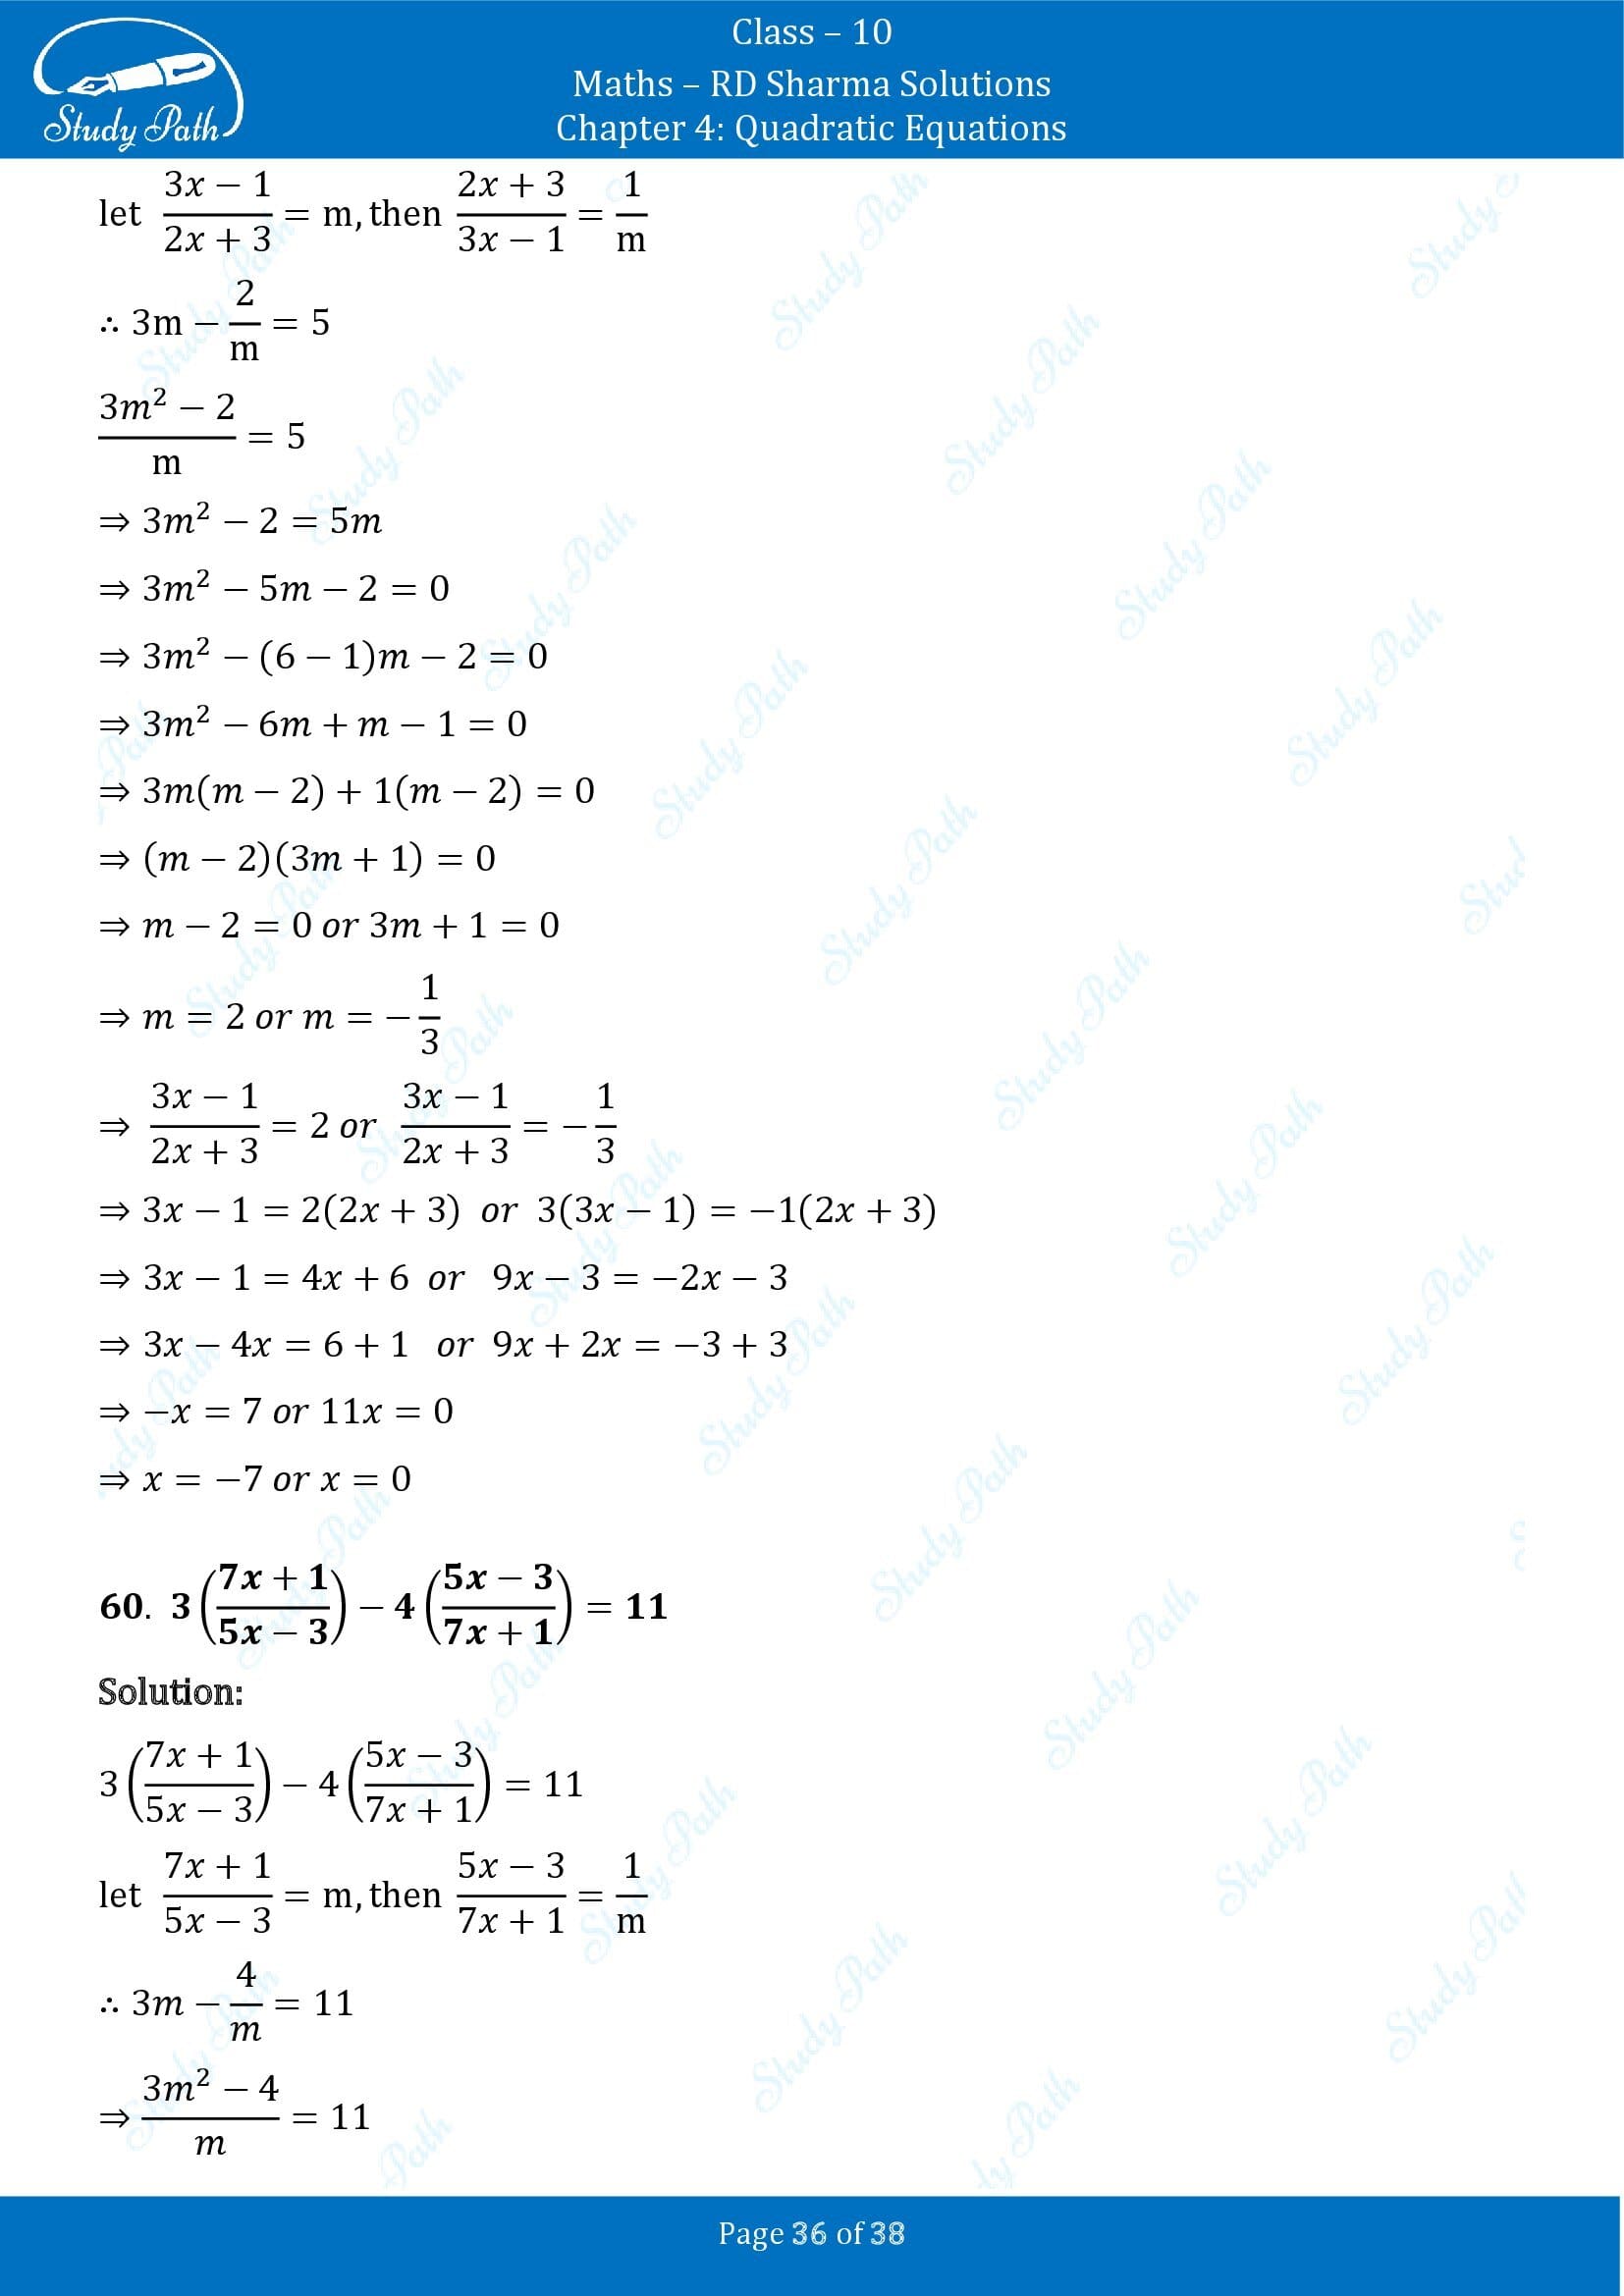 RD Sharma Solutions Class 10 Chapter 4 Quadratic Equations Exercise 4.3 00036